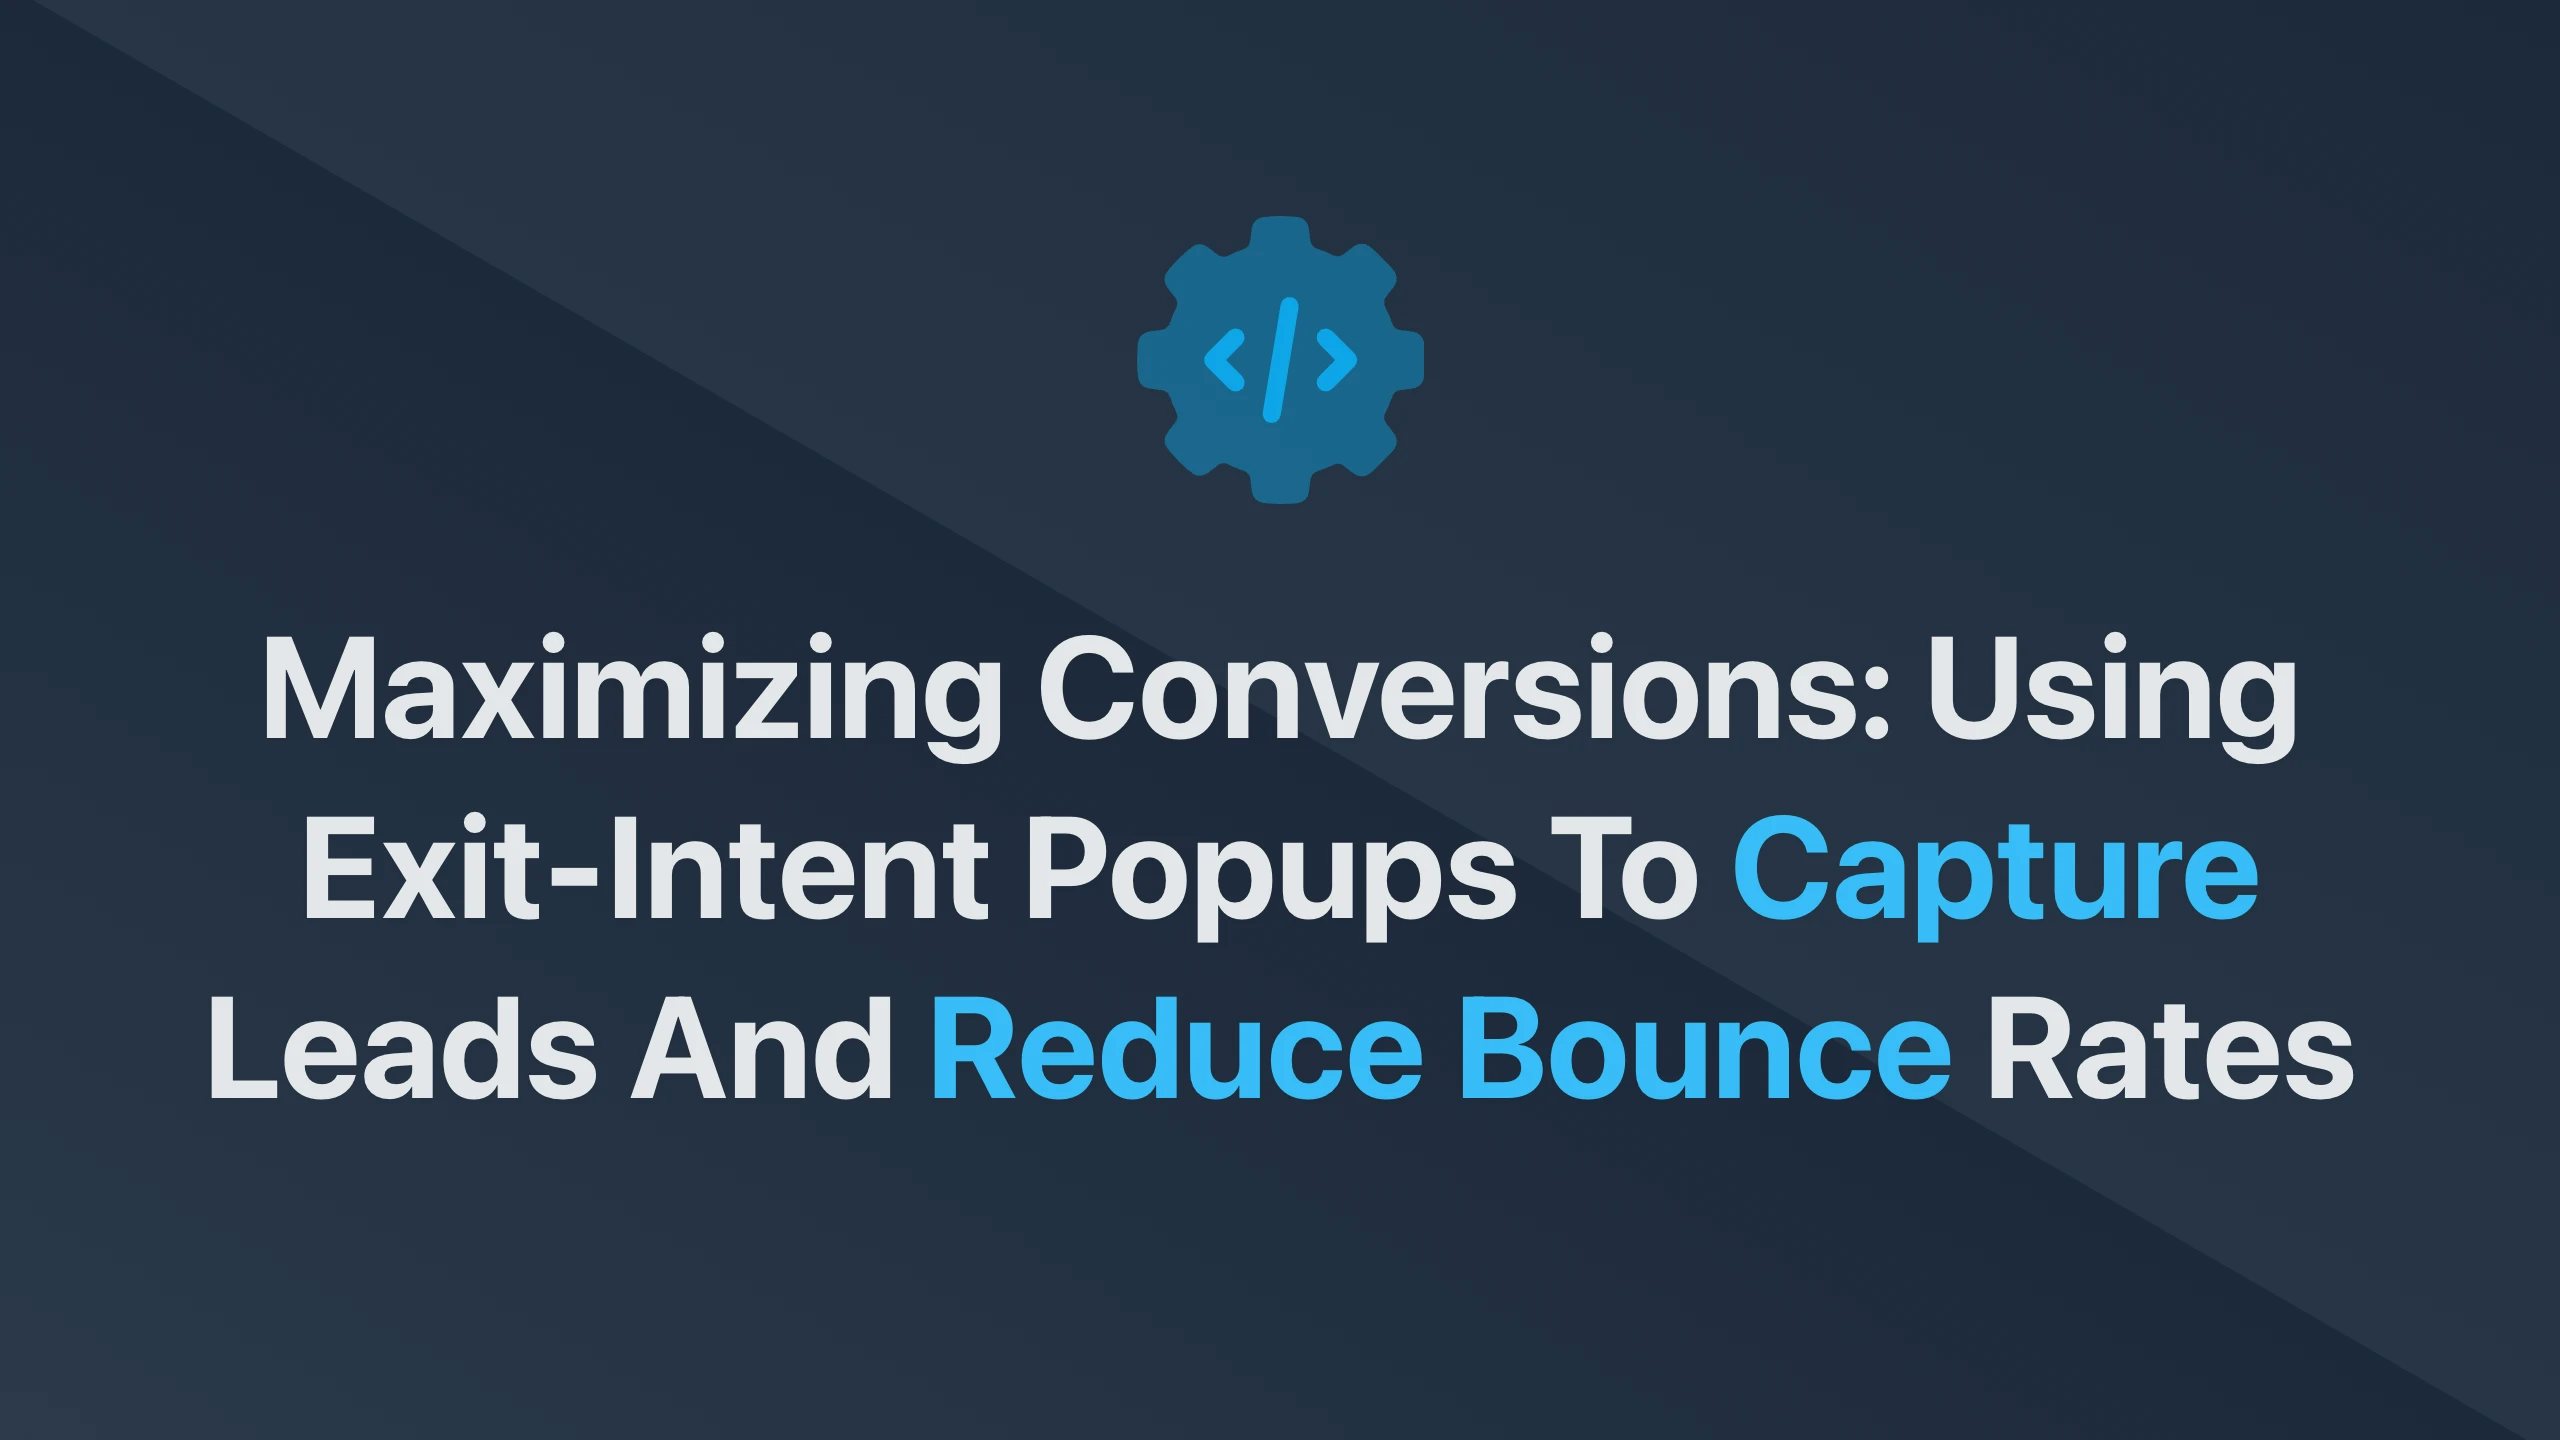 Cover Image for Maximizing Conversions: Using Exit-Intent Popups to Capture Leads and Reduce Bounce Rates